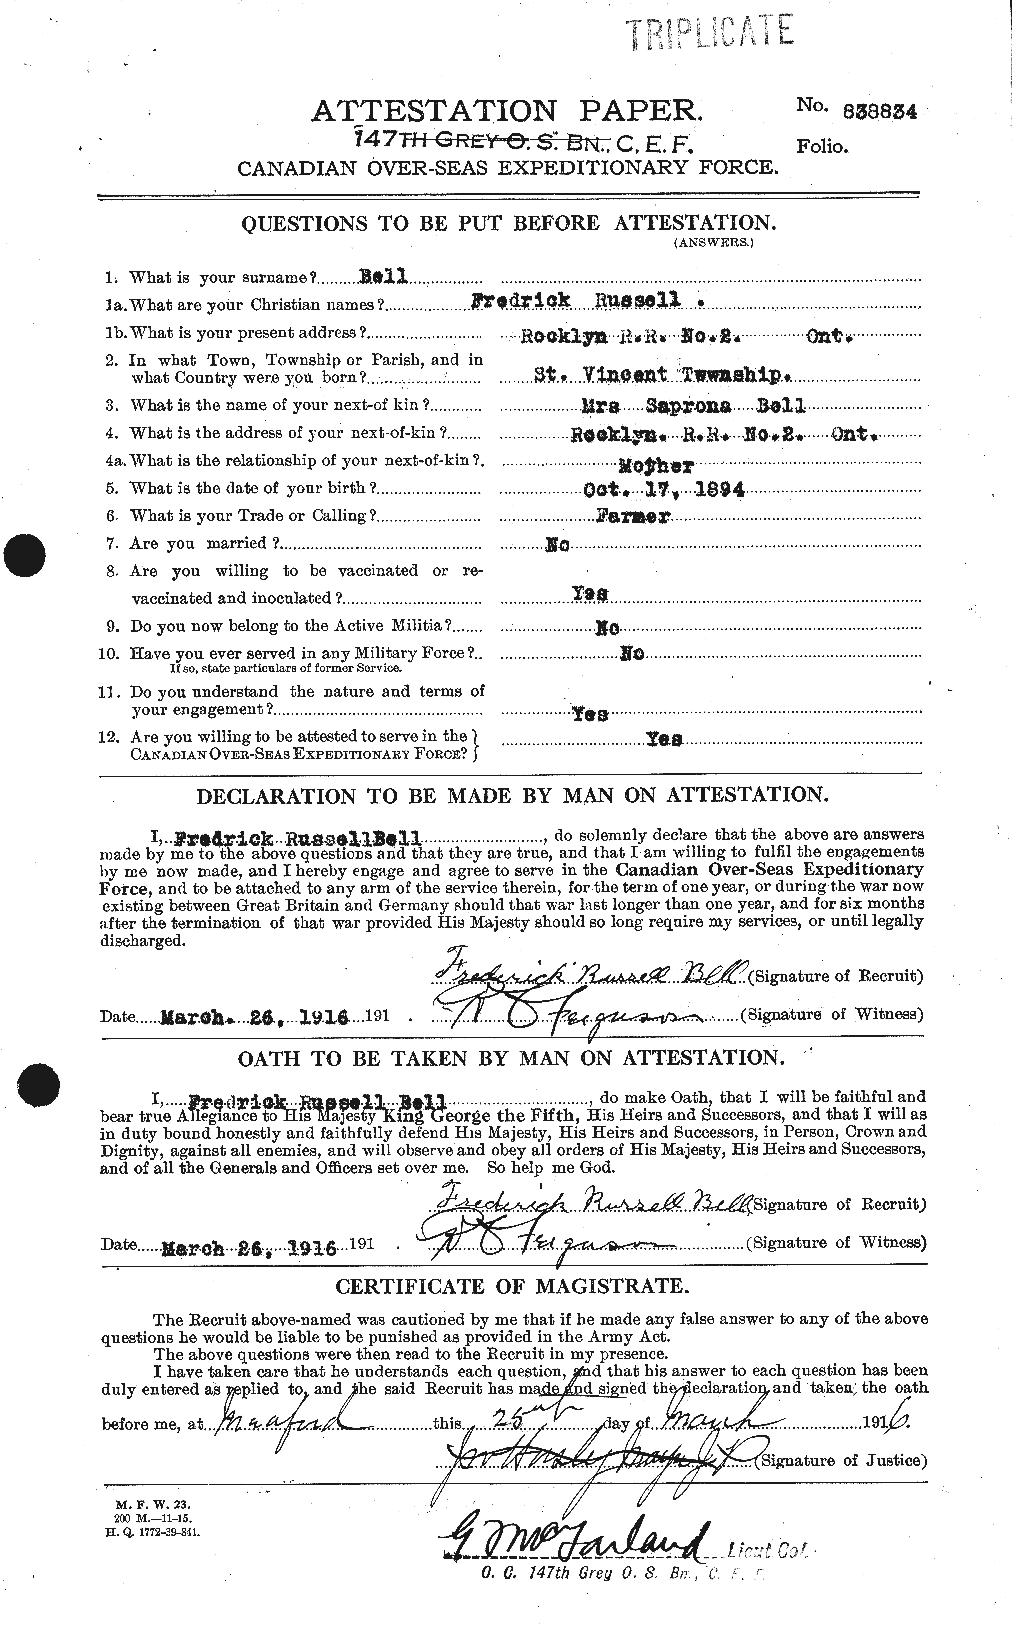 Personnel Records of the First World War - CEF 234126a